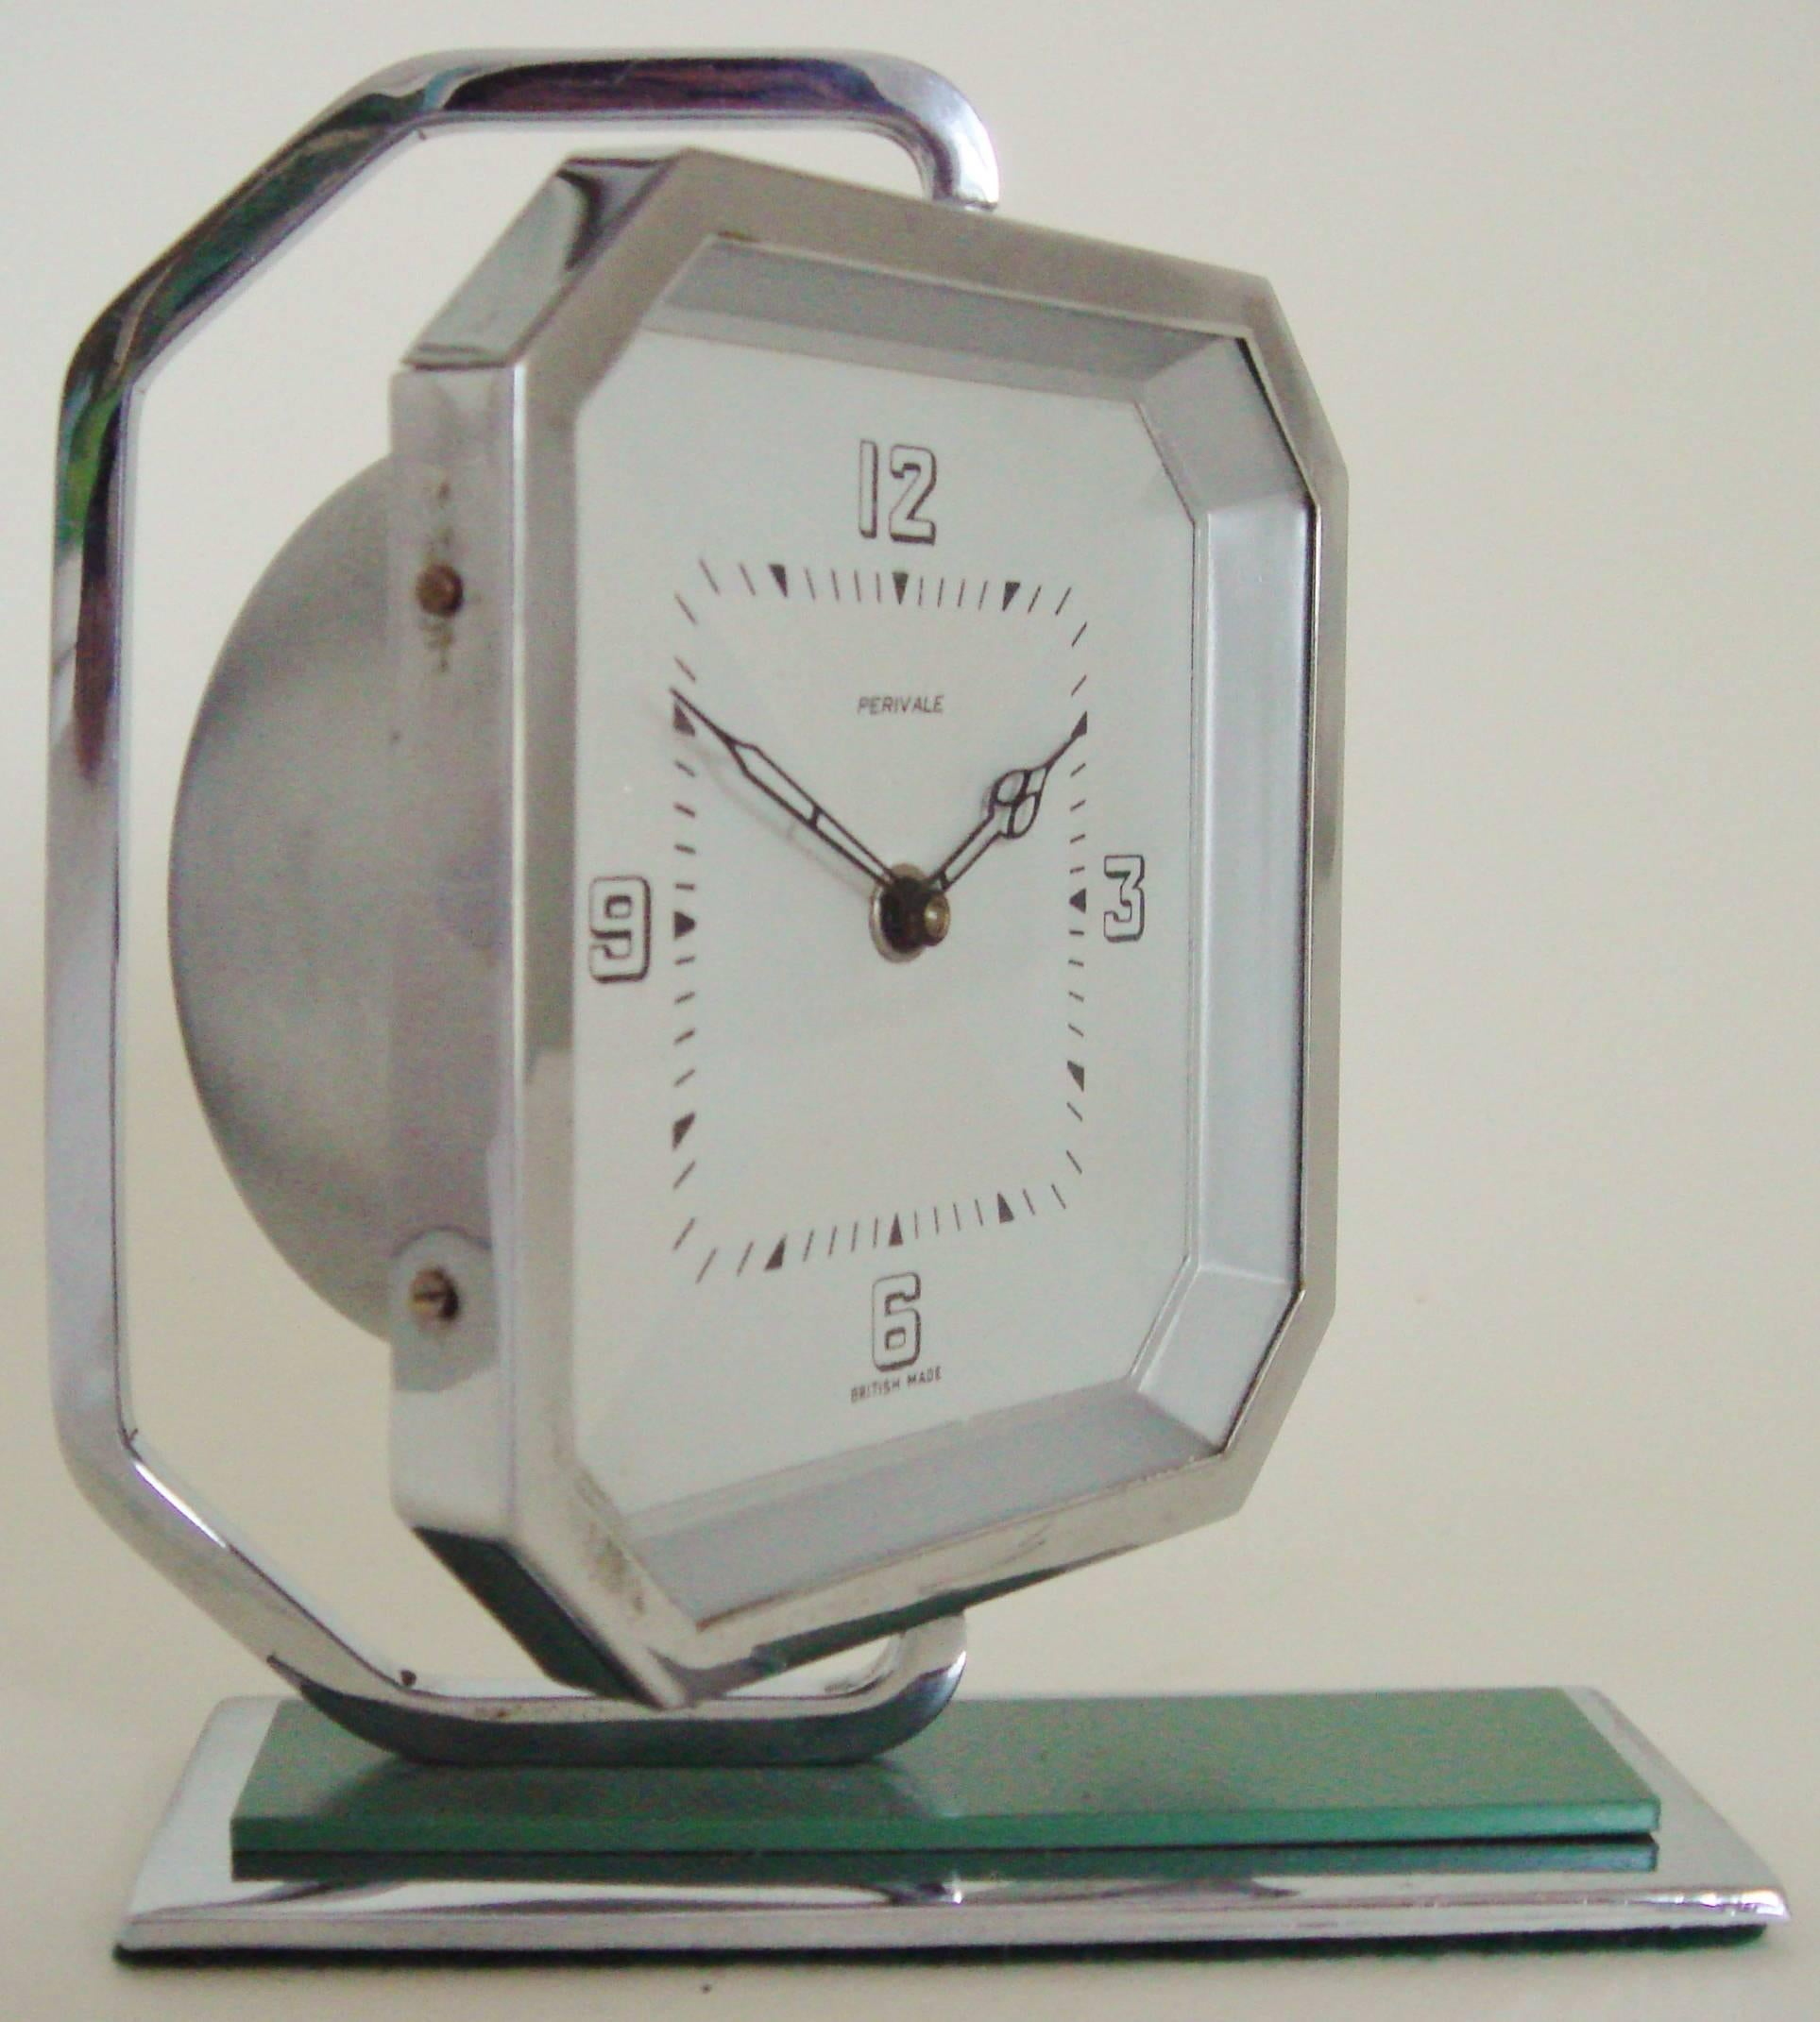 This beautifully designed English Art Deco chrome plated swivel desk clock is mounted on an eau-de-nil green painted stepped base and is by the Perivale British Clock Company of Greenford, Middlesex. The swivel arm is sympathetically shaped to echo